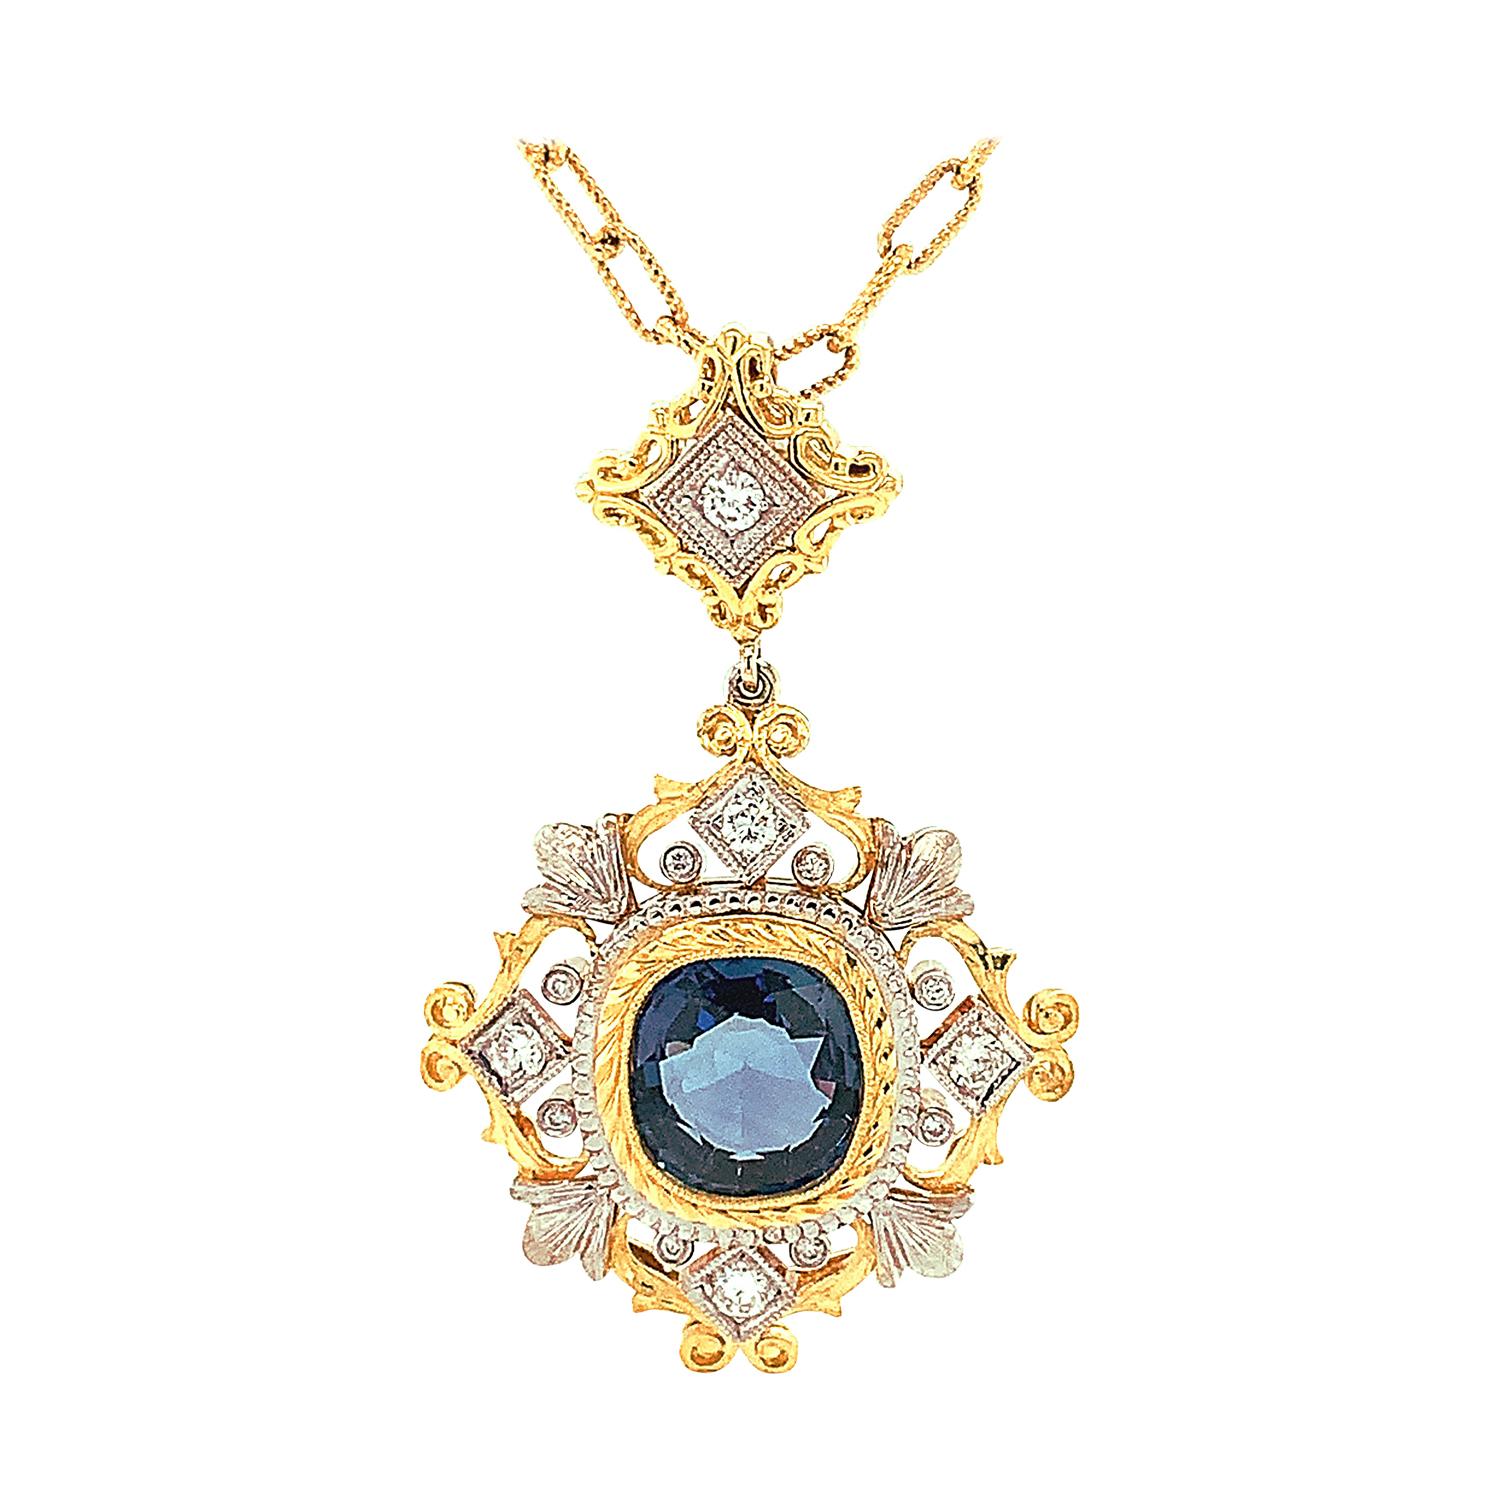 3.38 Carat Sapphire and Diamond Handmade Necklace in 18k White and Yellow Gold 